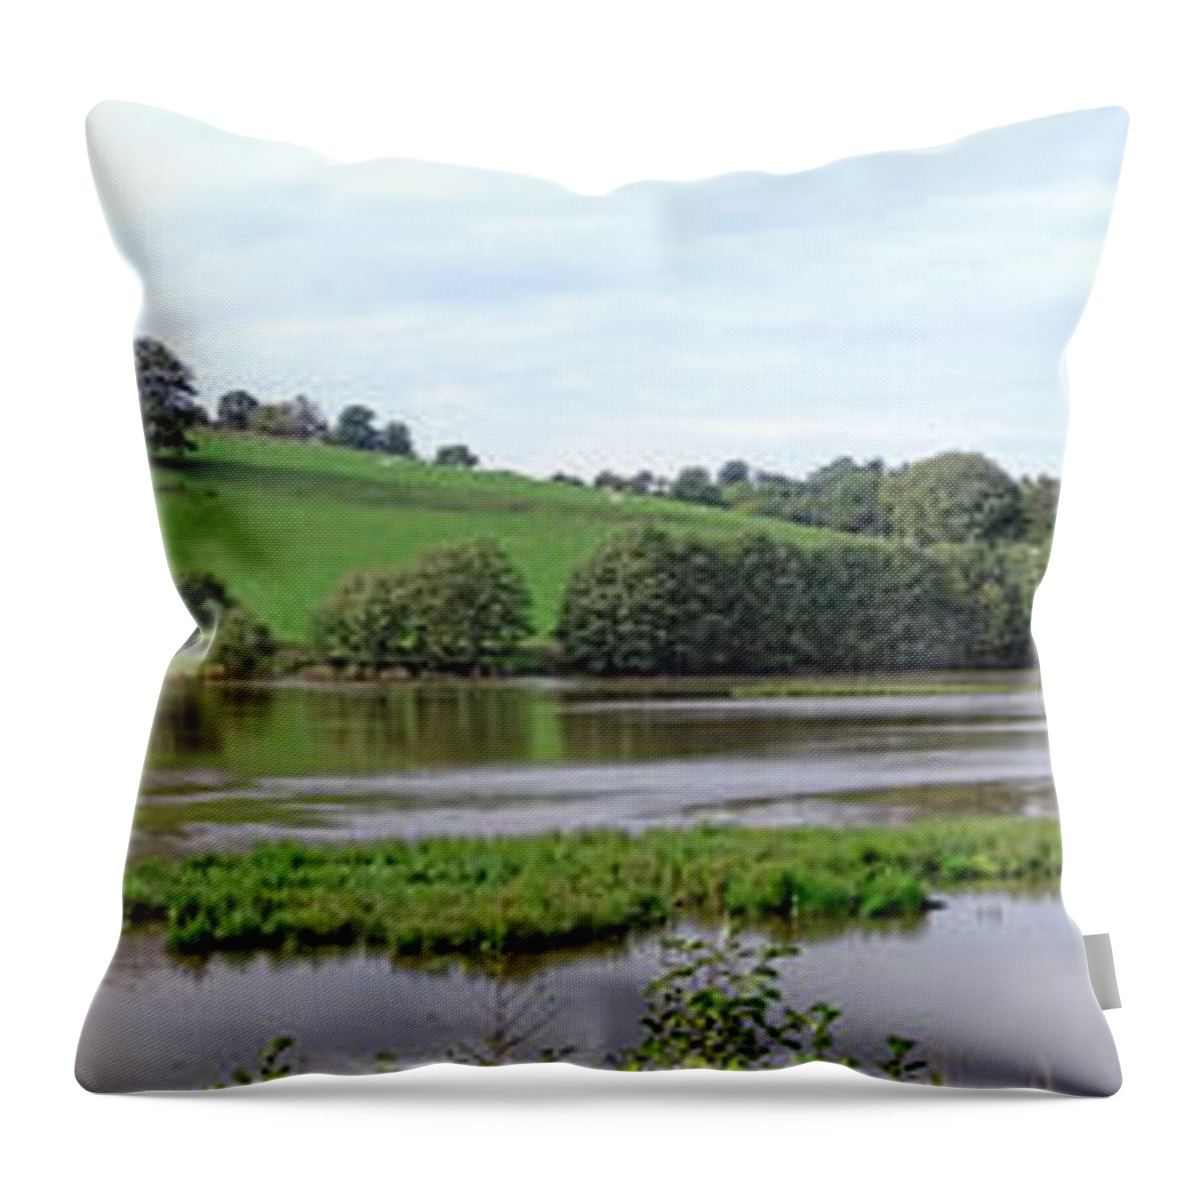 France Throw Pillow featuring the photograph Dam Wide by Olivier Le Queinec